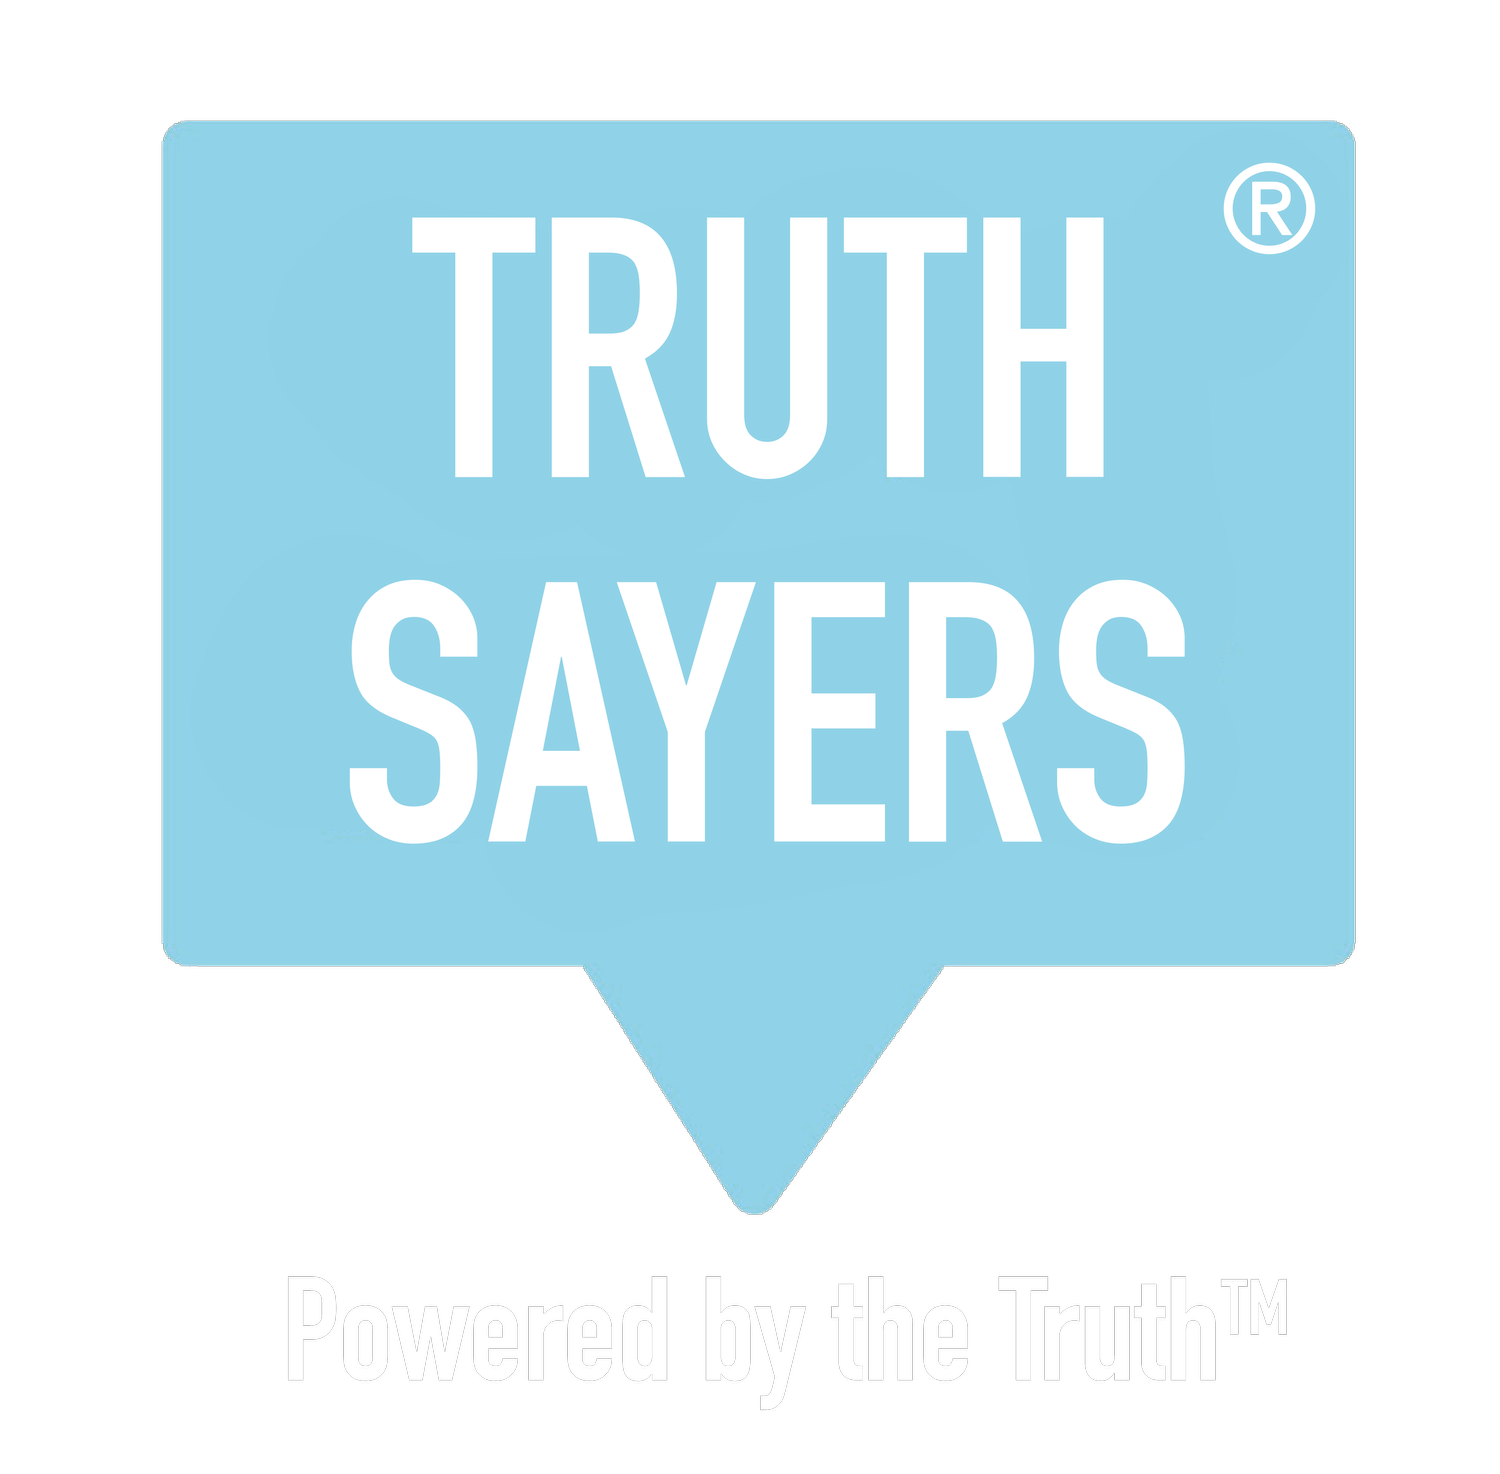 Truthsayers